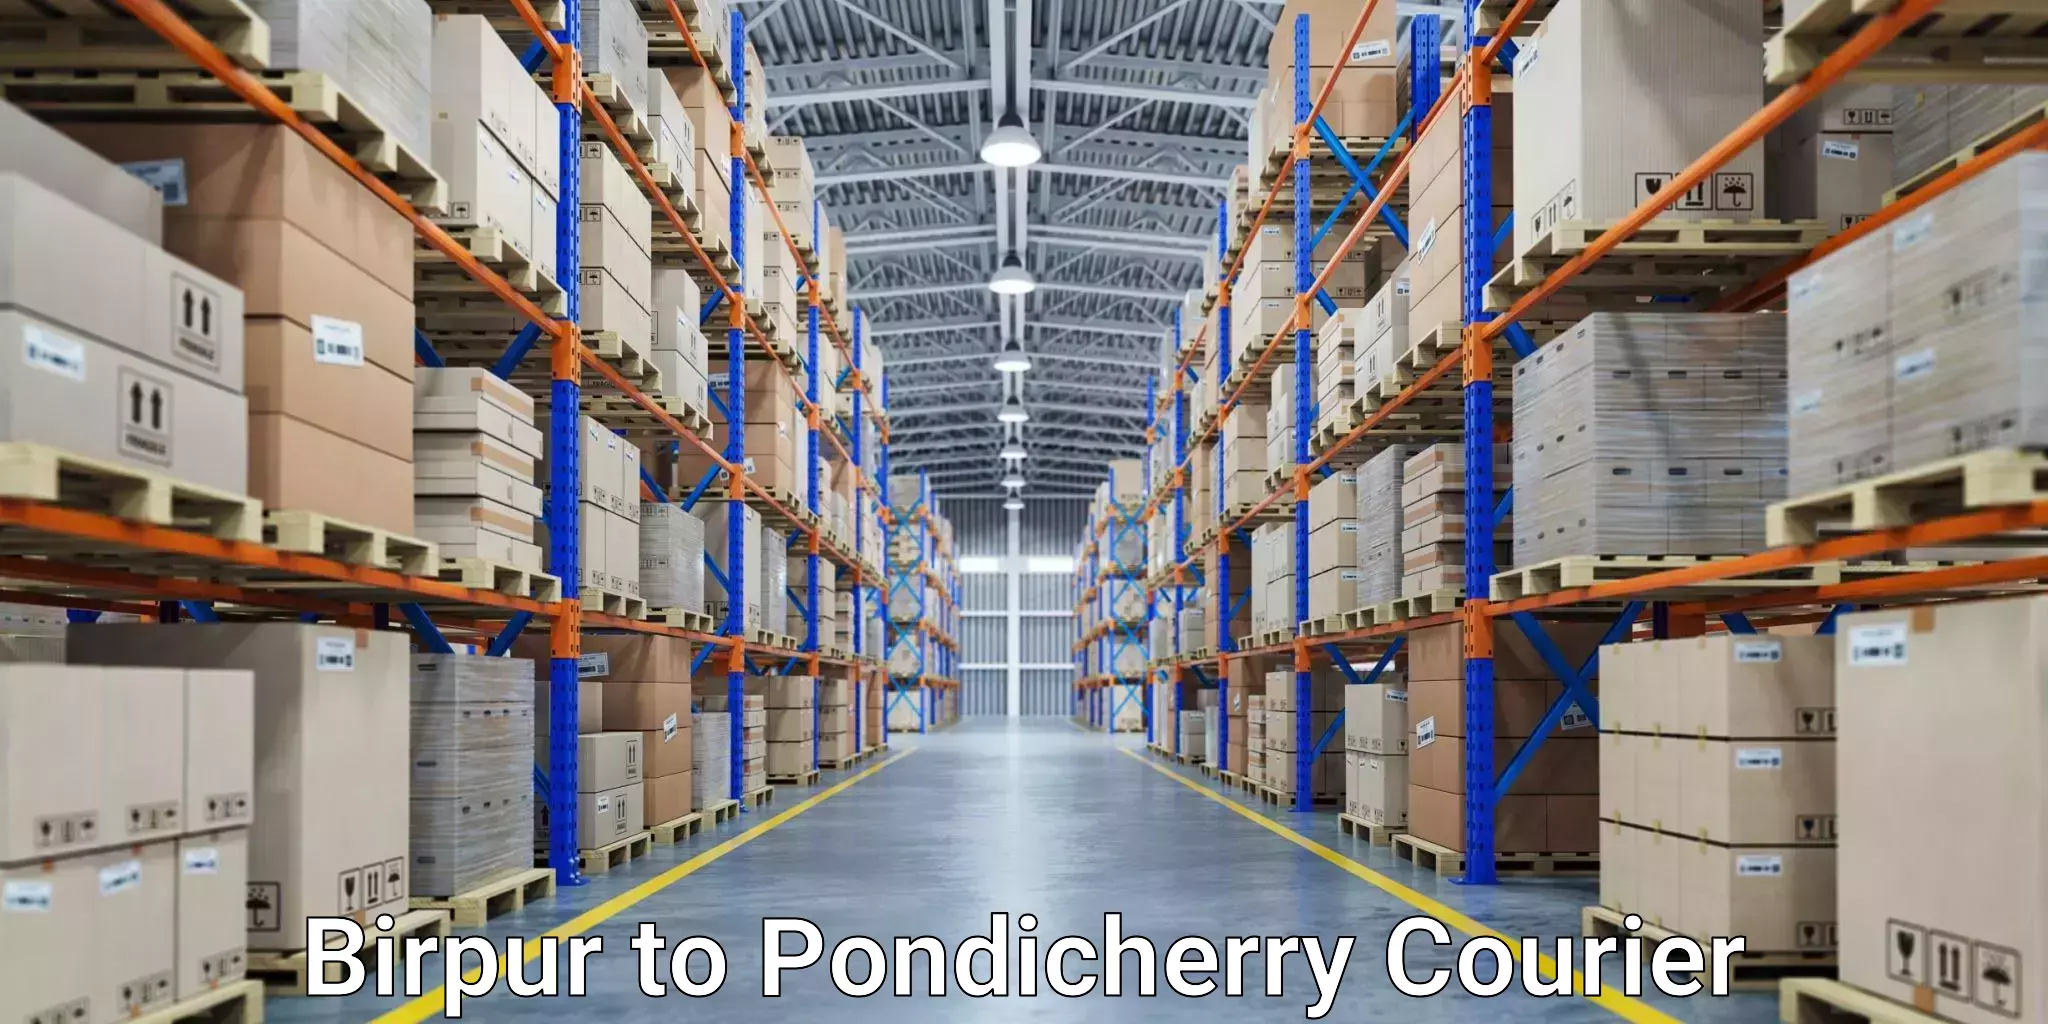 State-of-the-art courier technology in Birpur to Pondicherry